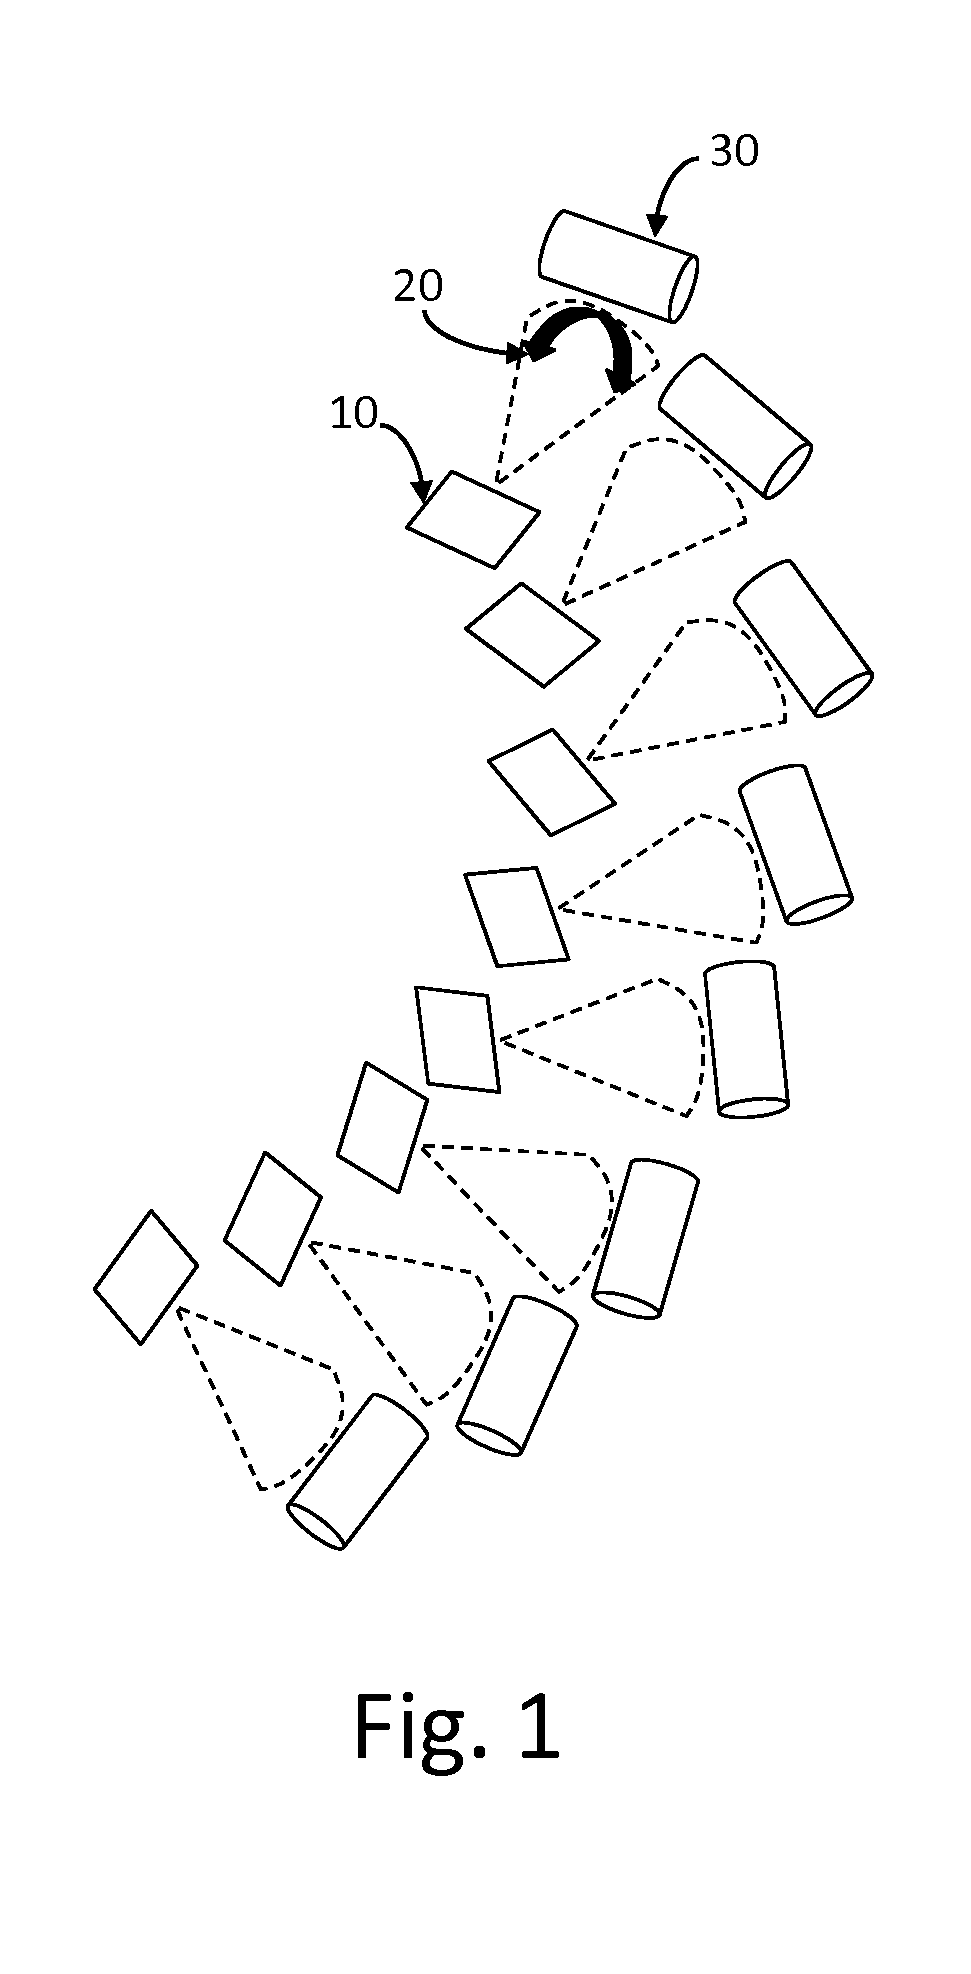 Three-dimensional-mapping two-dimensional-scanning lidar based on one-dimensional-steering optical phased arrays and method of using same